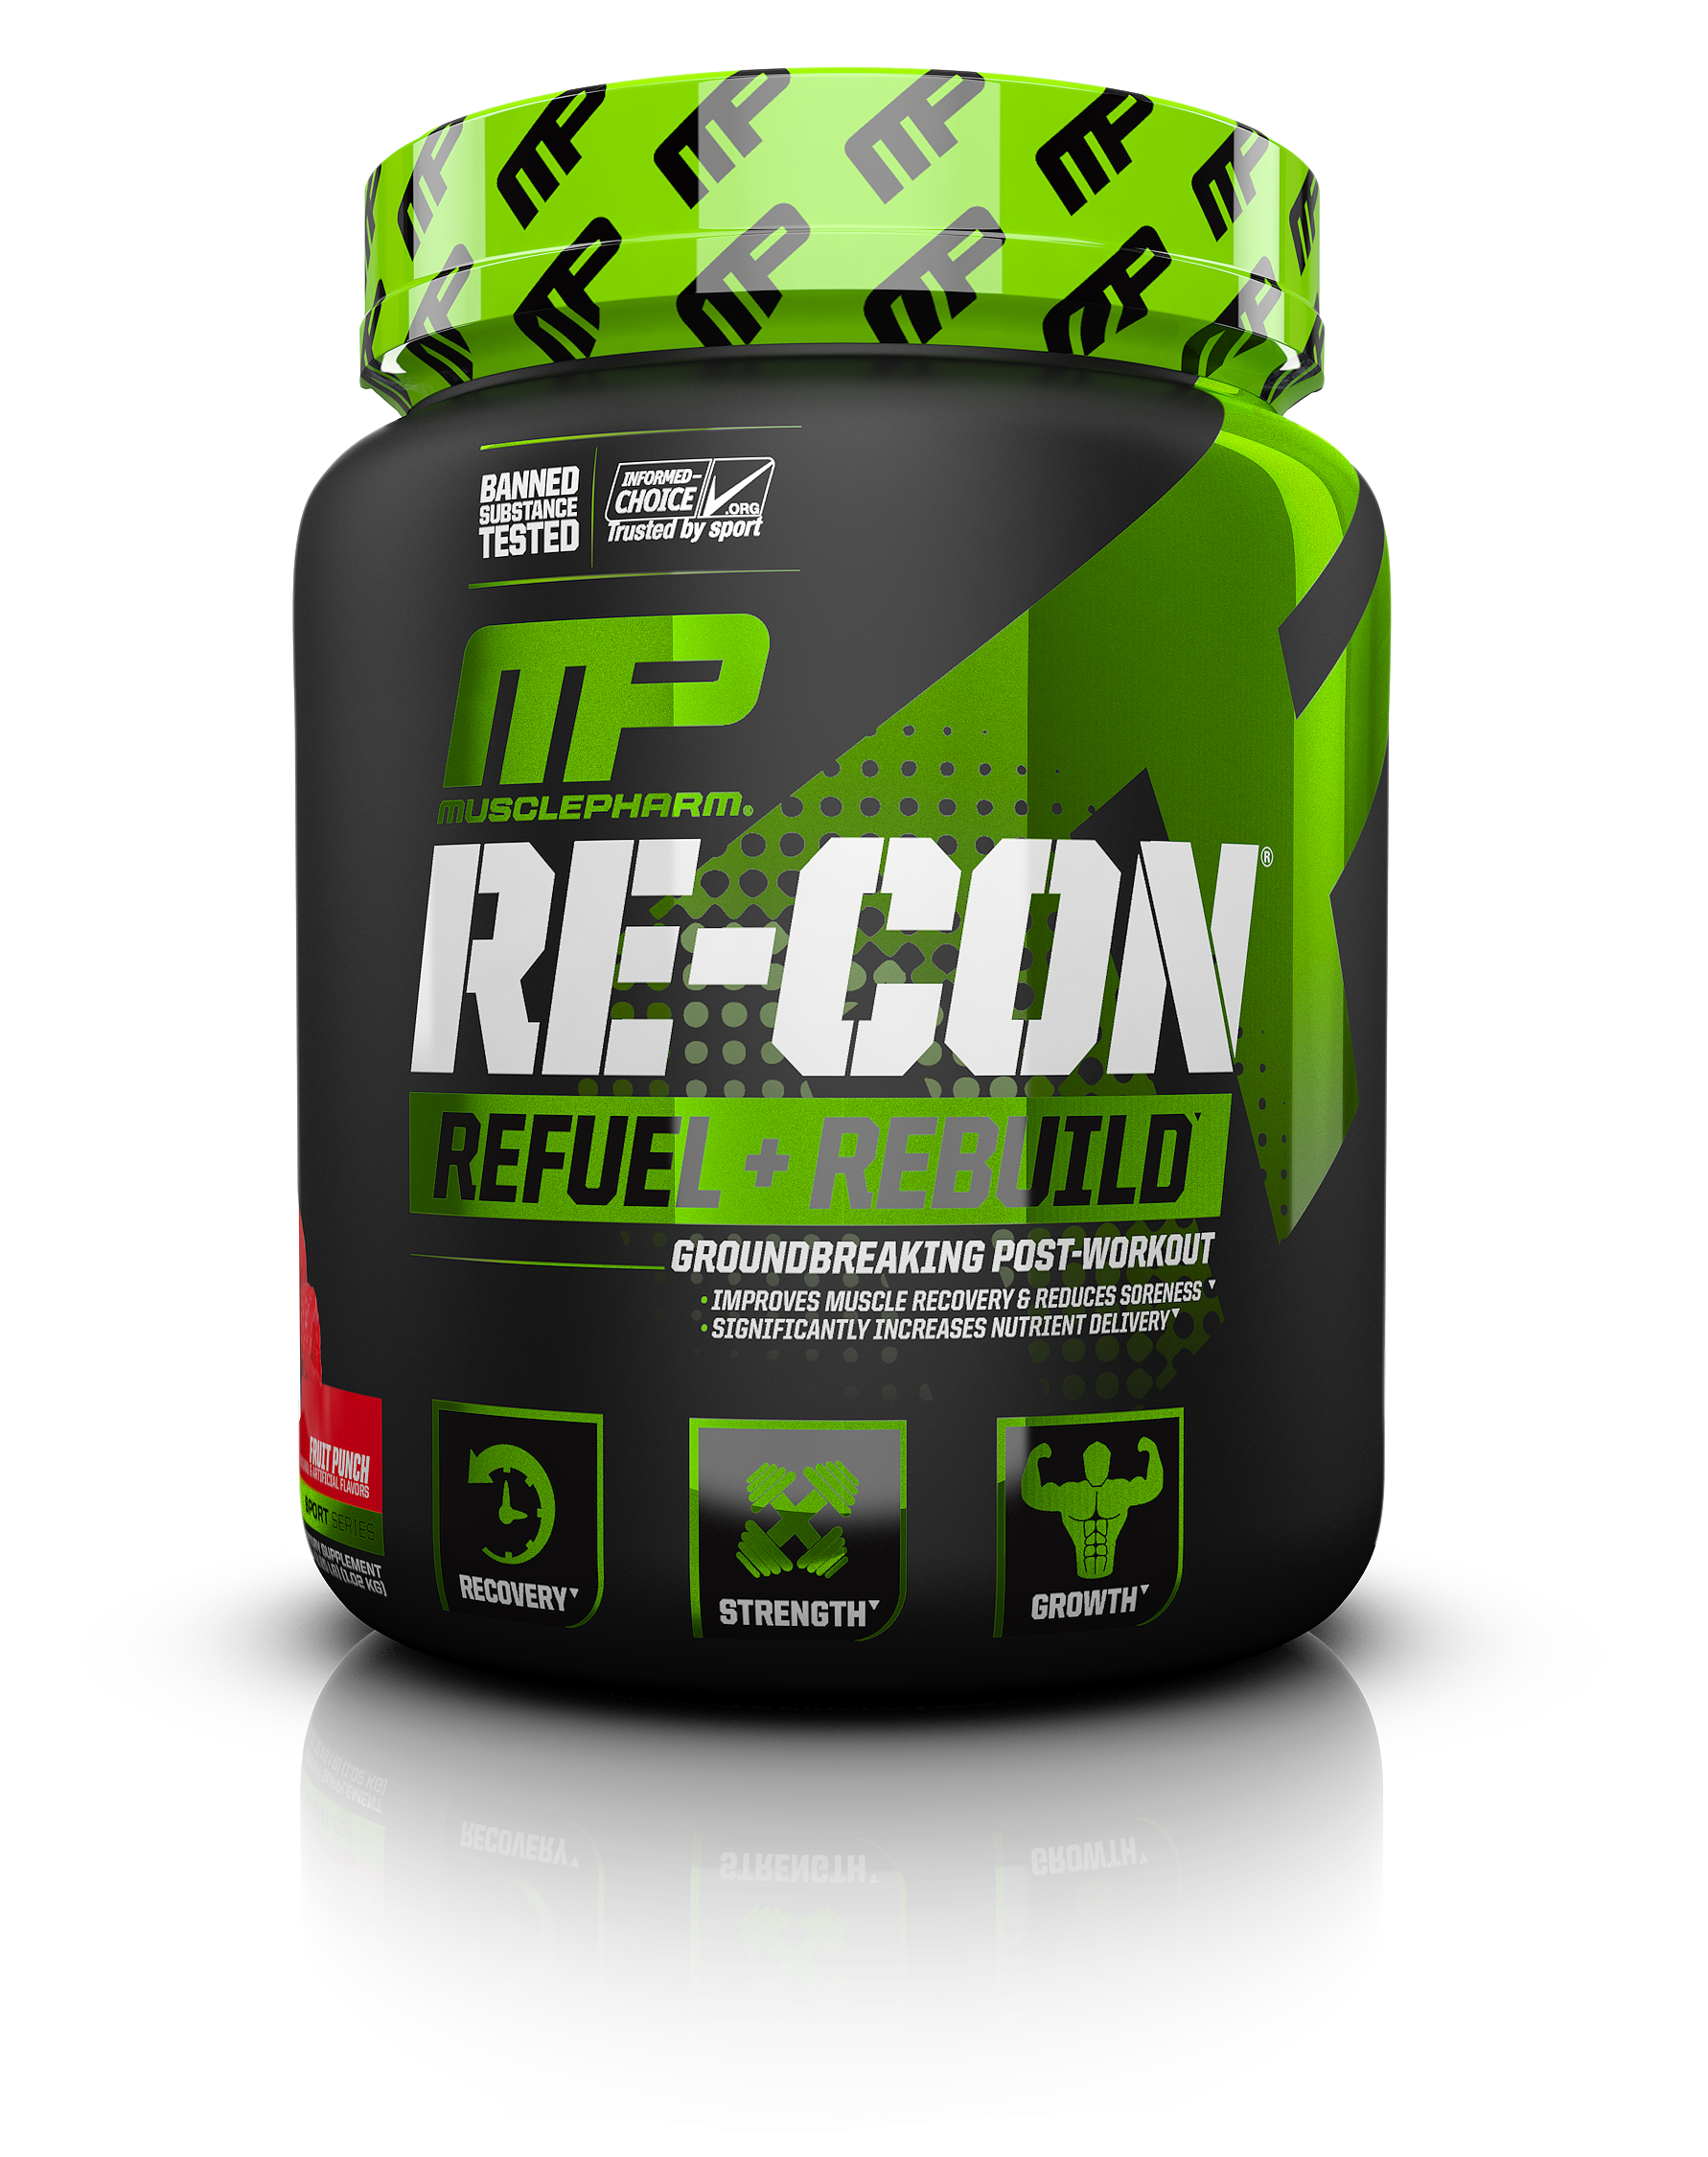 MusclePharm Says Its Relaunched Recovery Product Is First to Include GroPlex and VitaCherry Ingredients